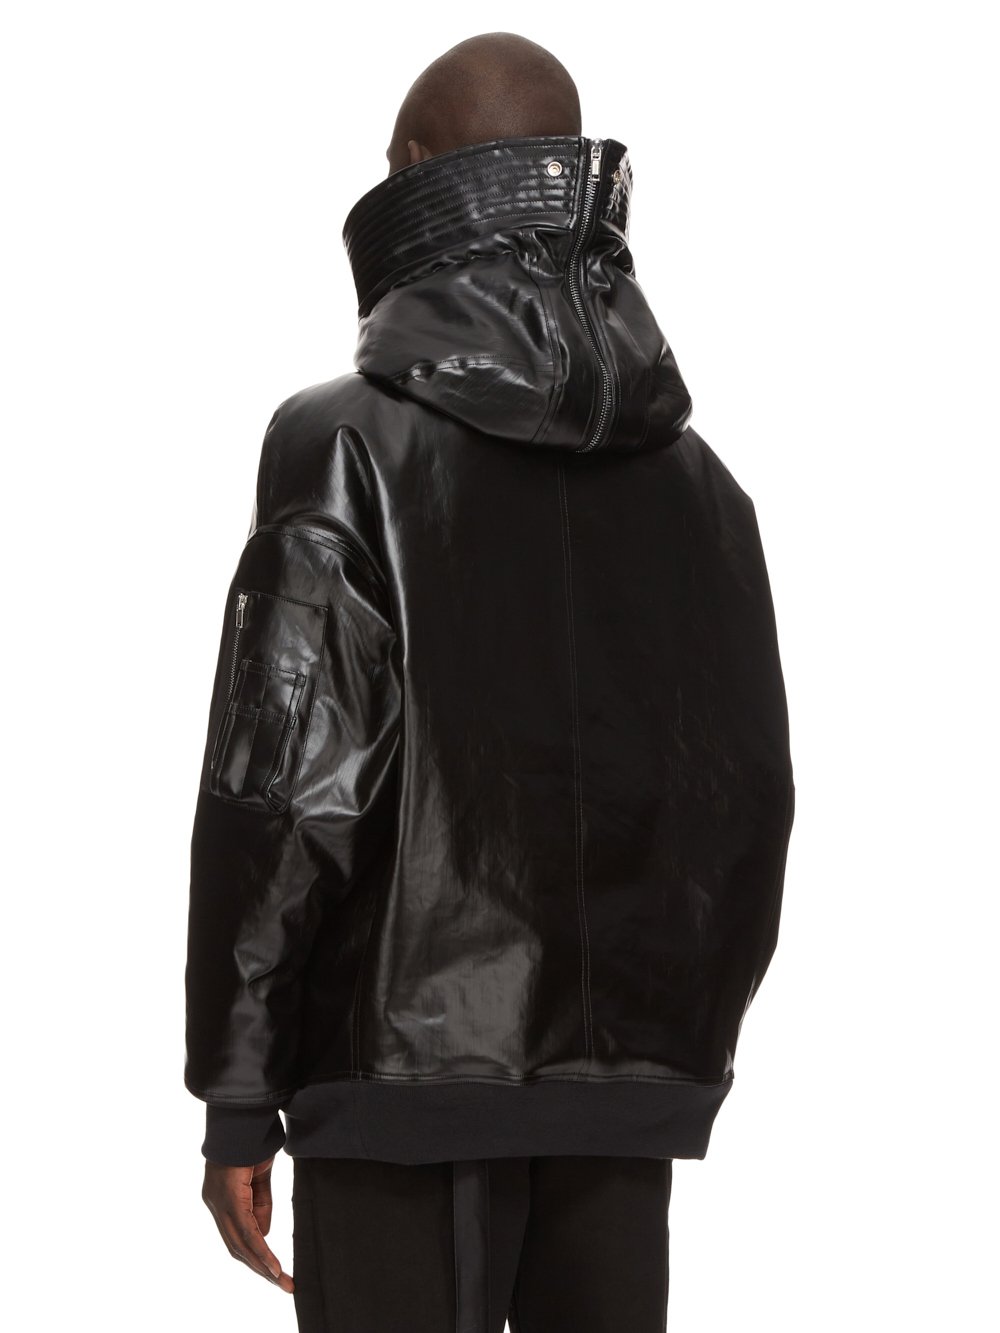 DRKSHDW FW23 LUXOR HOODED BOMBER IN BLACK AND MAUVE RUBBER COVERED STRETCH DENIM